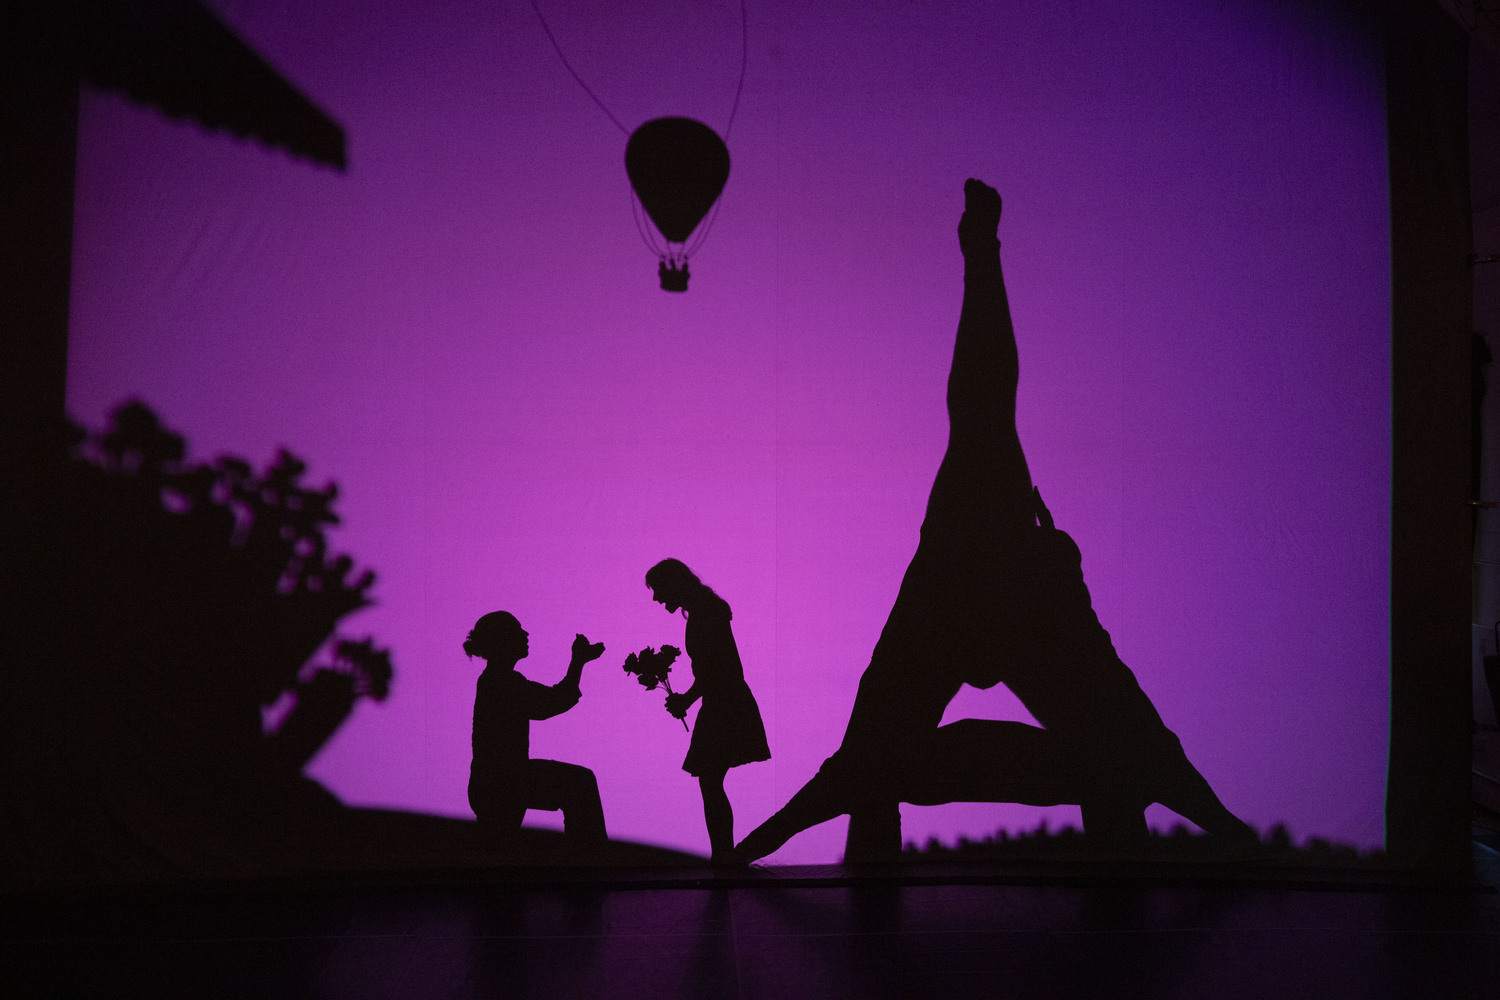 Dance St. Louis presents Pilobolus in Shadowland - The New Adventure. April 20 at the Touhill Performing Arts Center. Photo by Kai Heimmel. 4